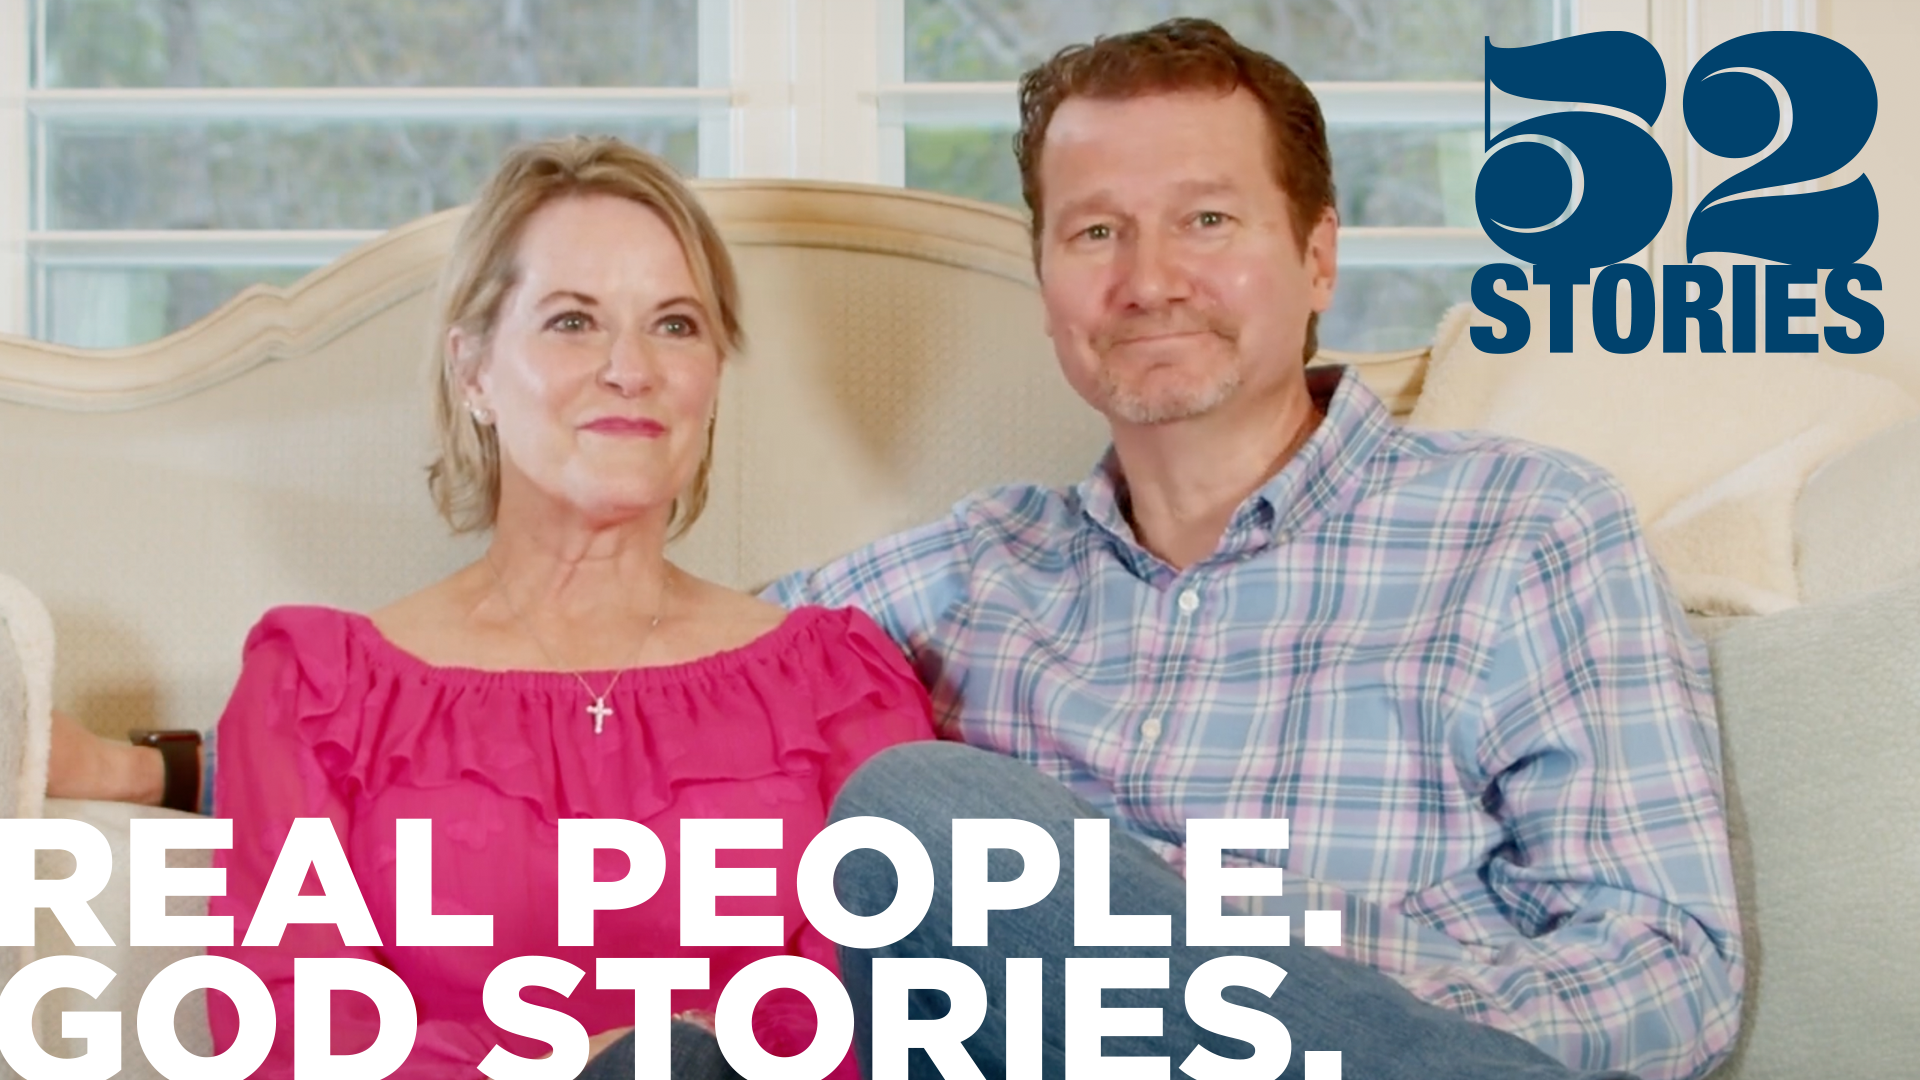 52 stories: Real people, God stories.